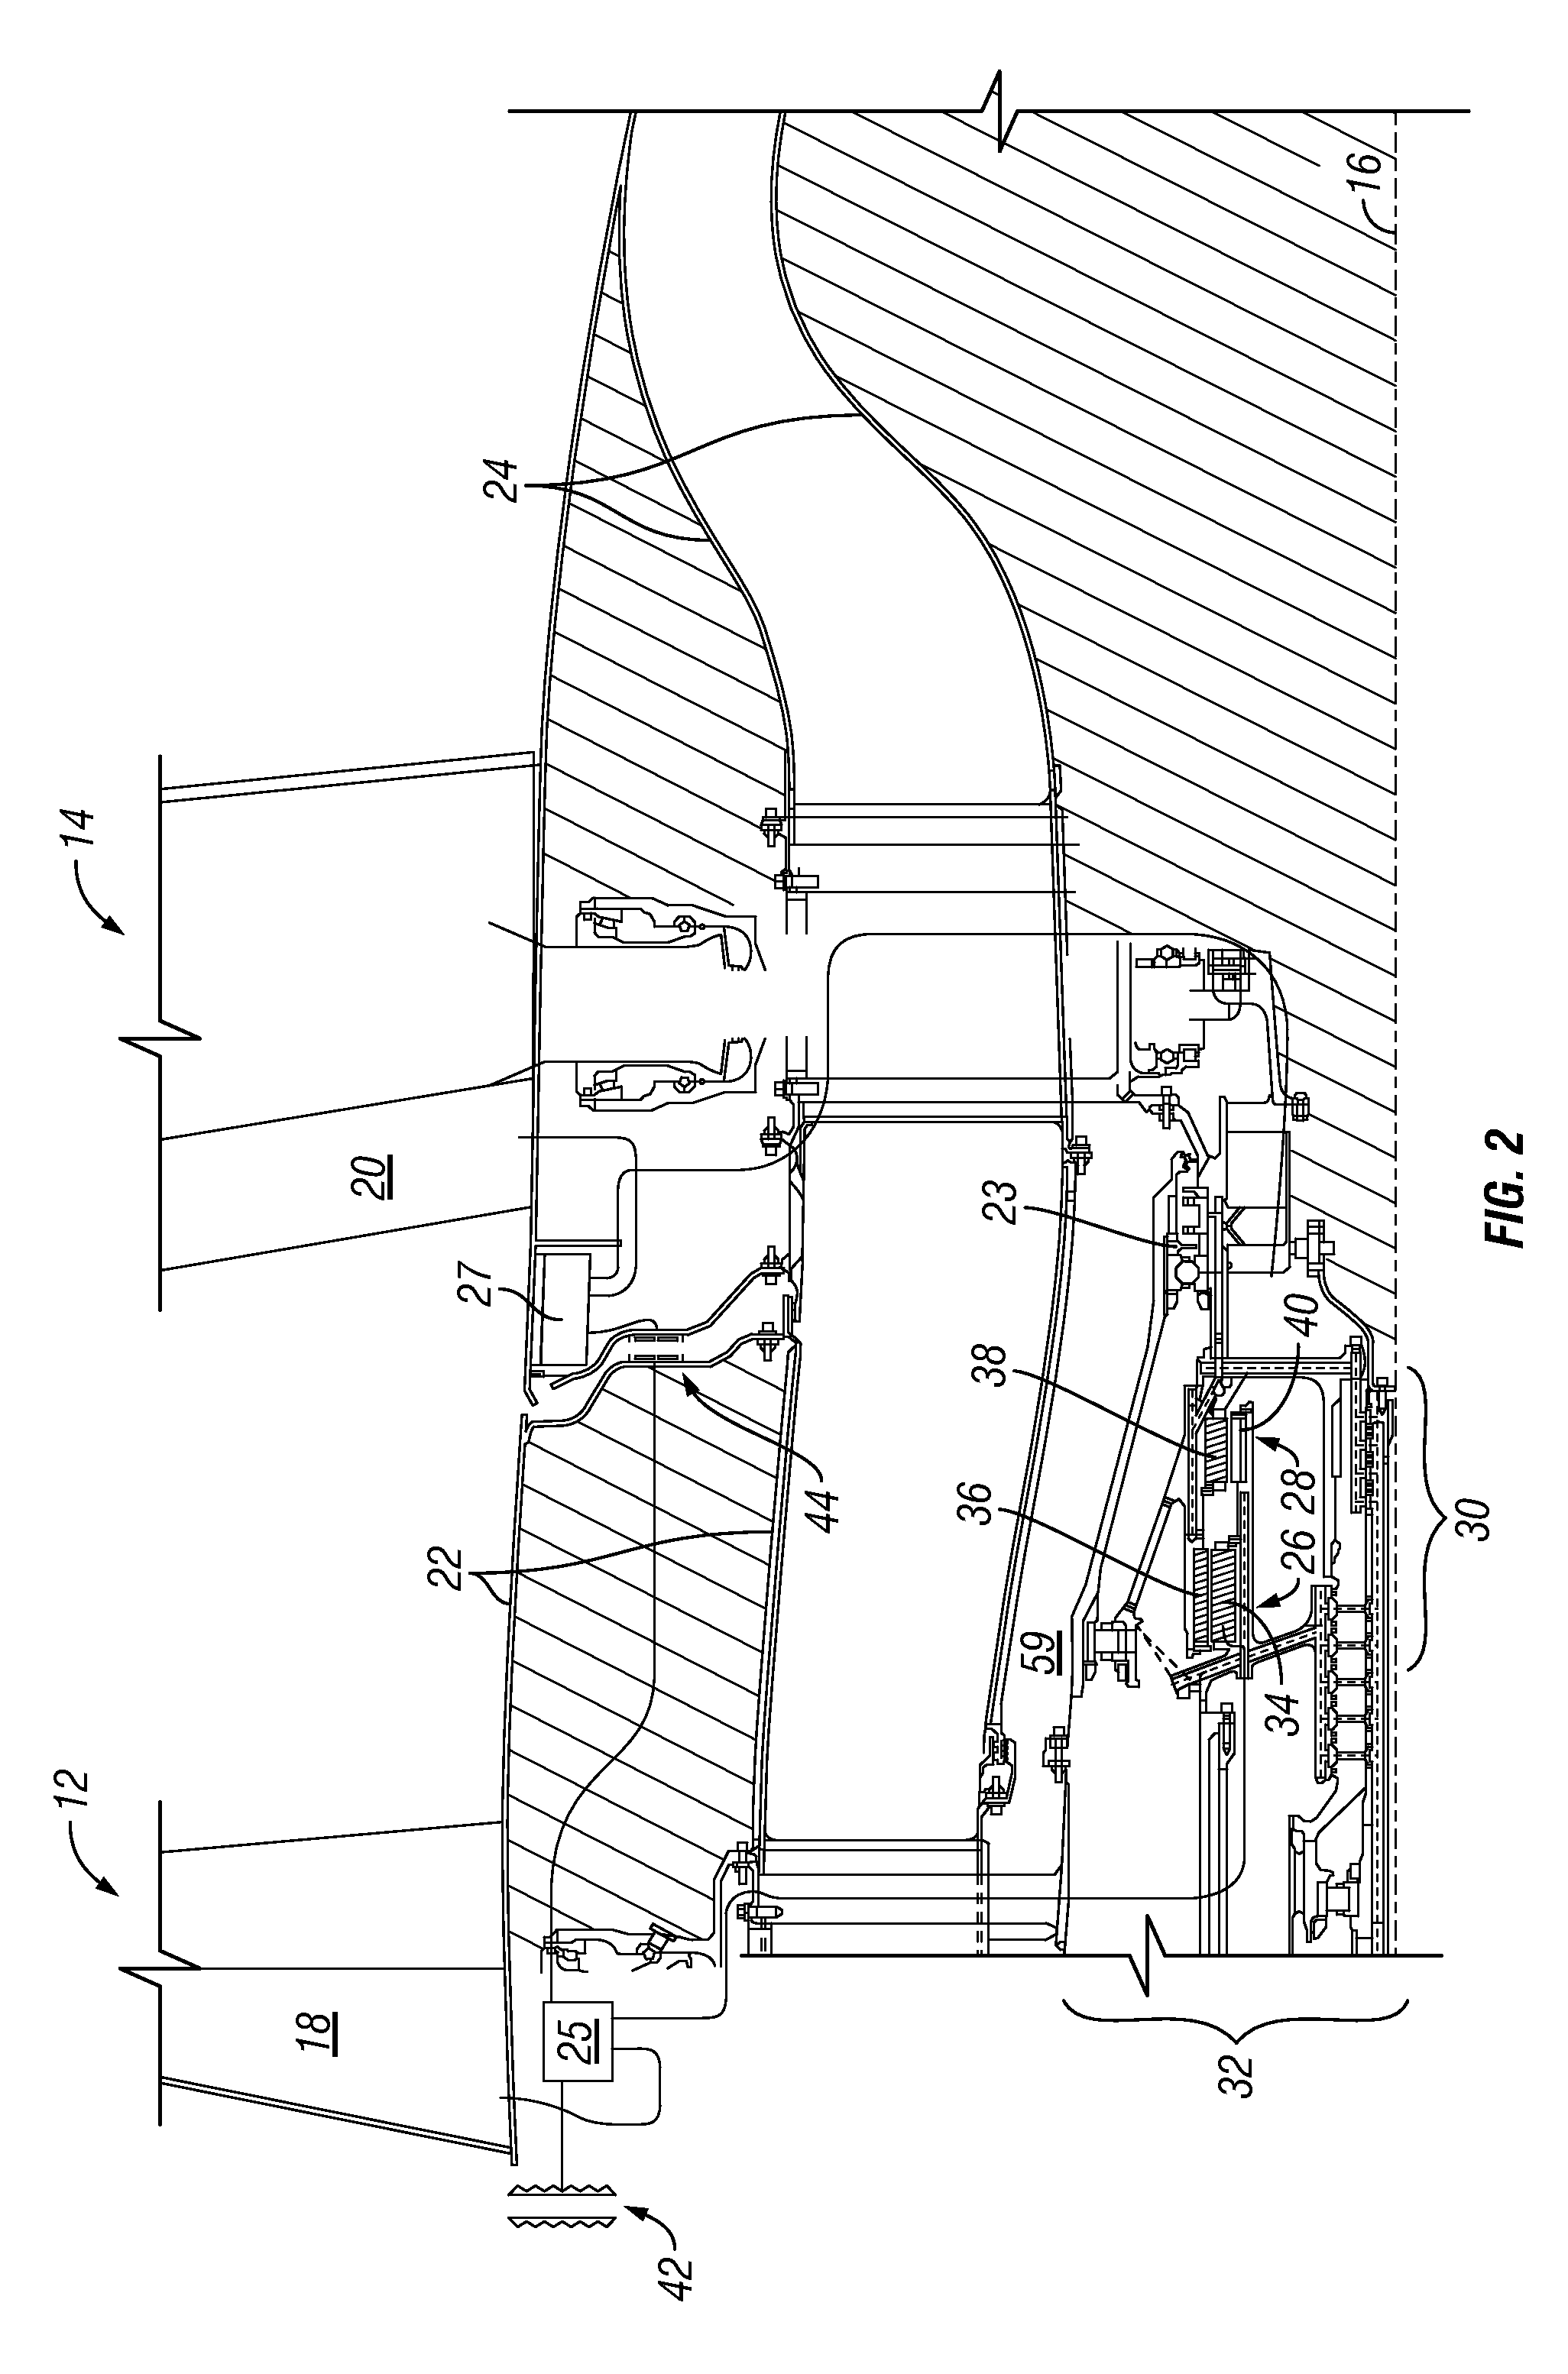 Electrical power generation apparatus for contra-rotating open-rotor aircraft propulsion system